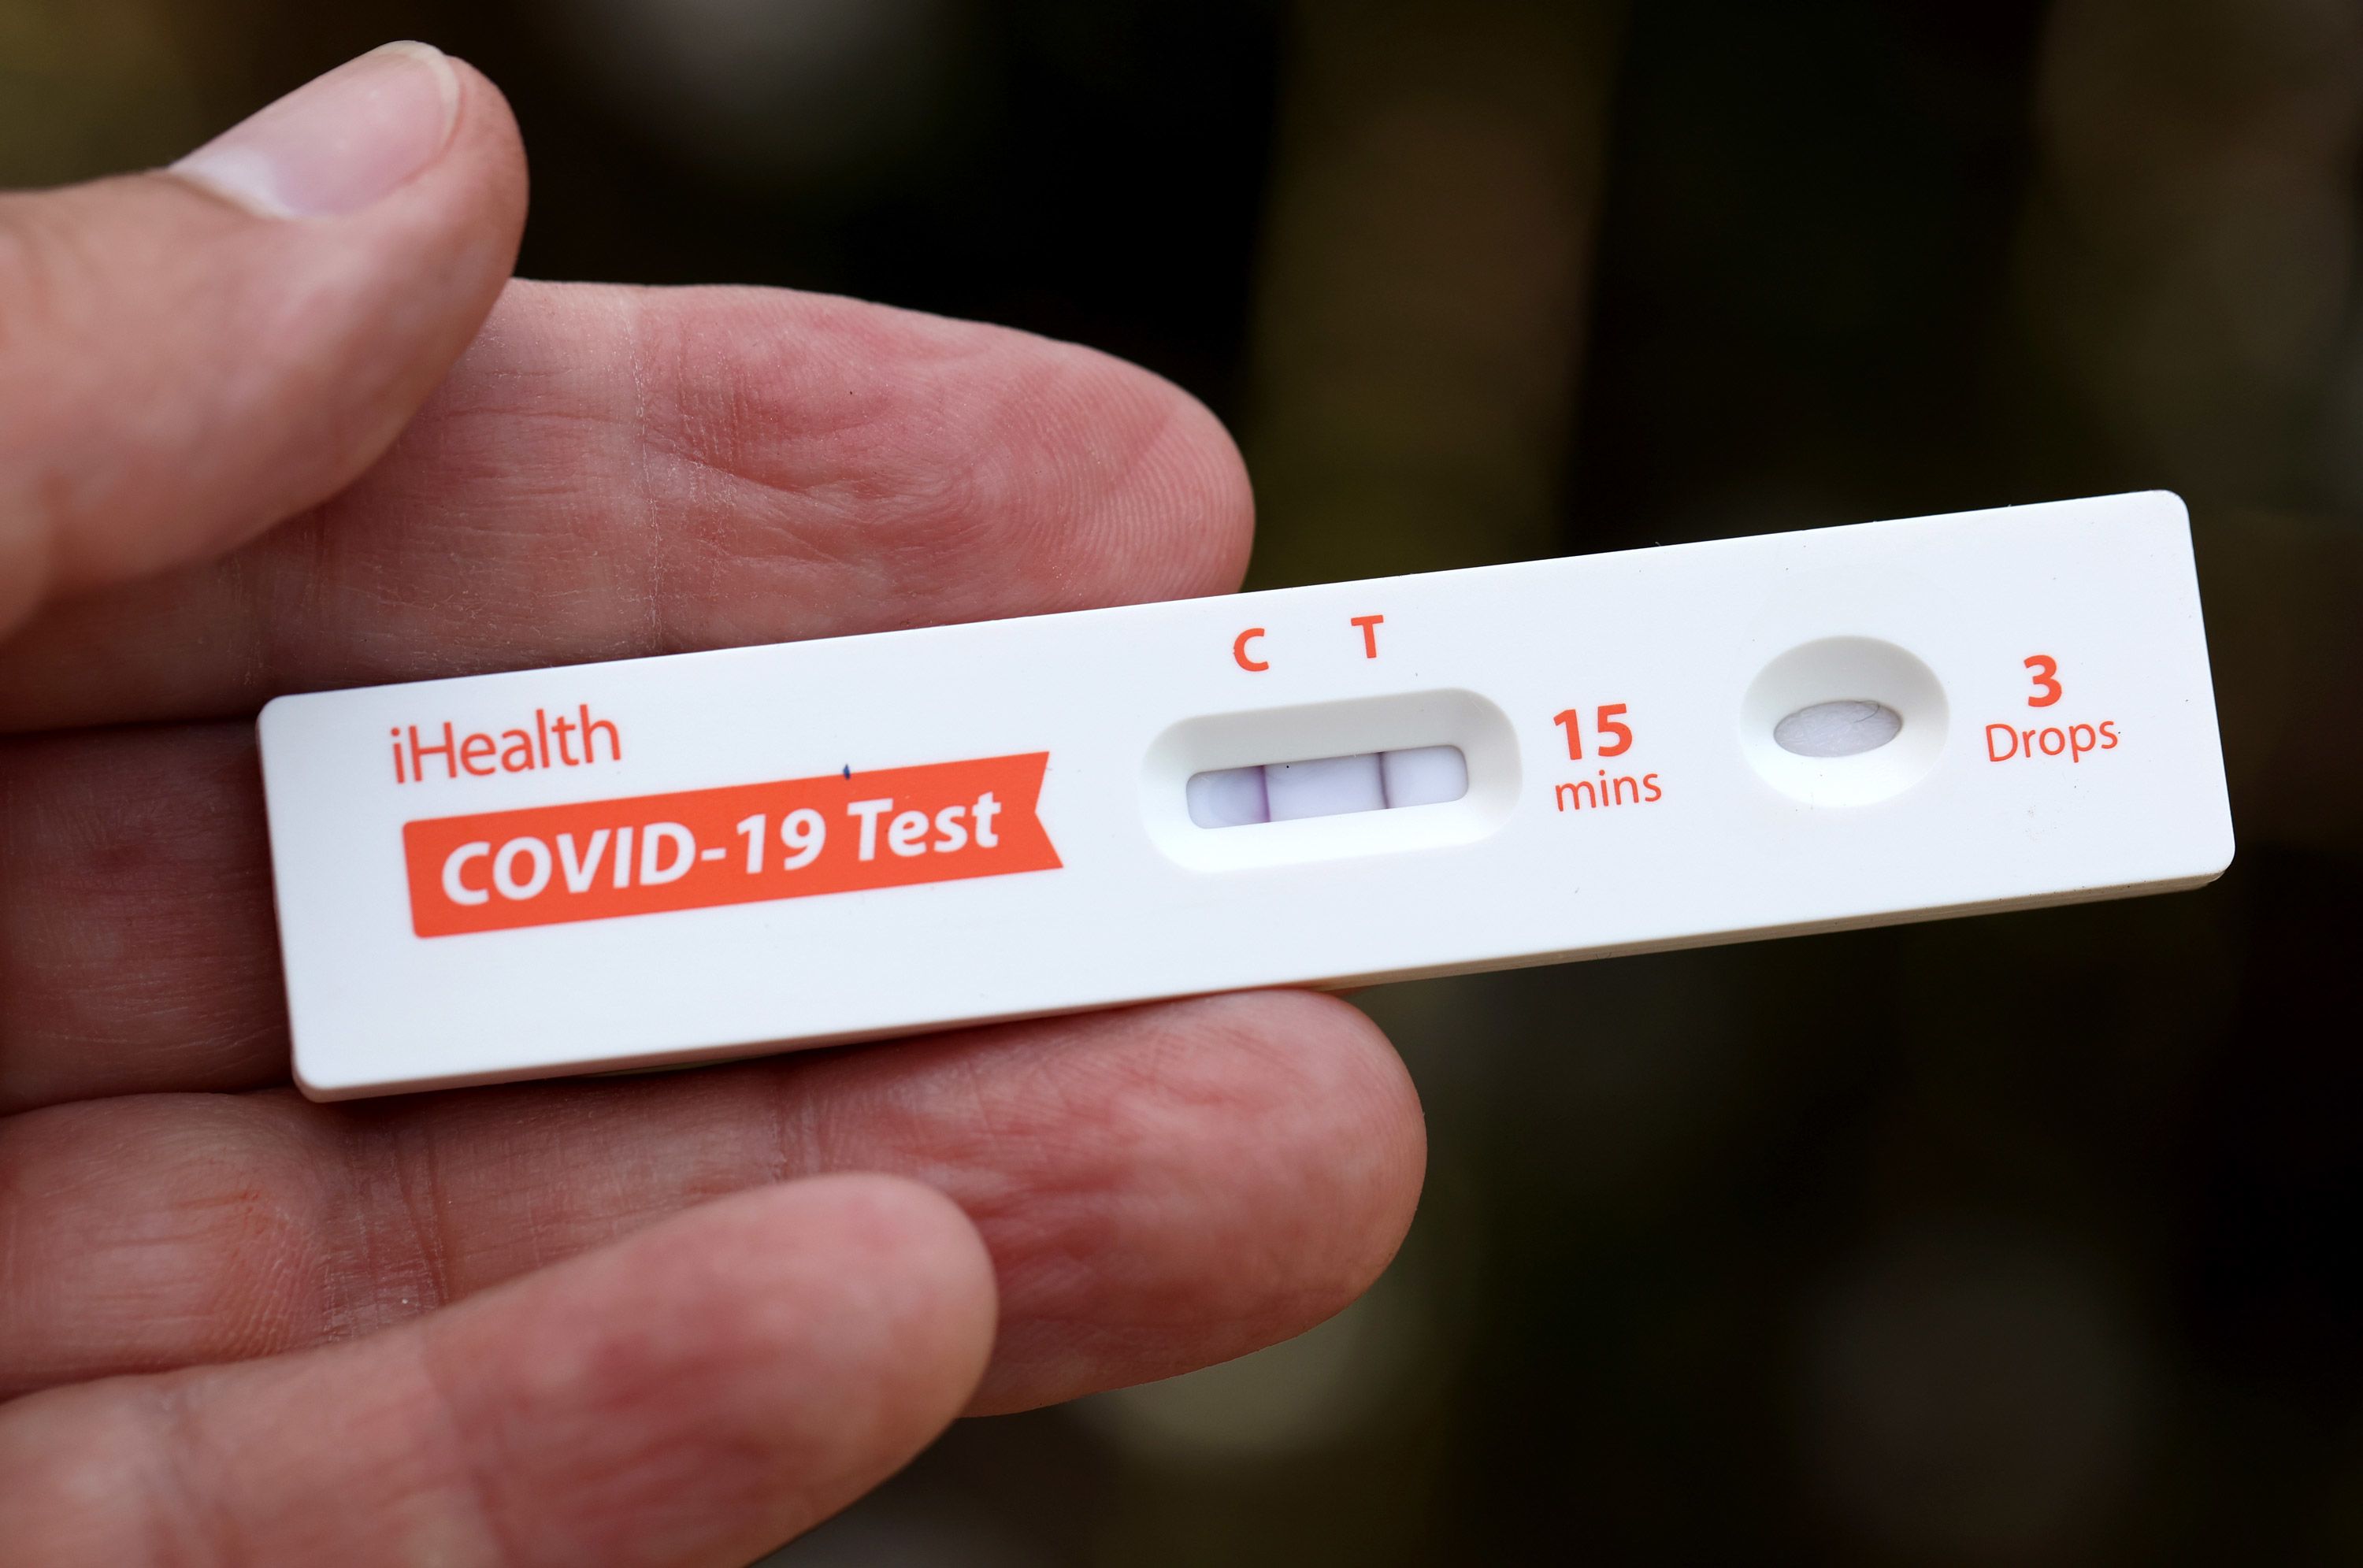 Coronavirus tests are pretty accurate, but far from perfect